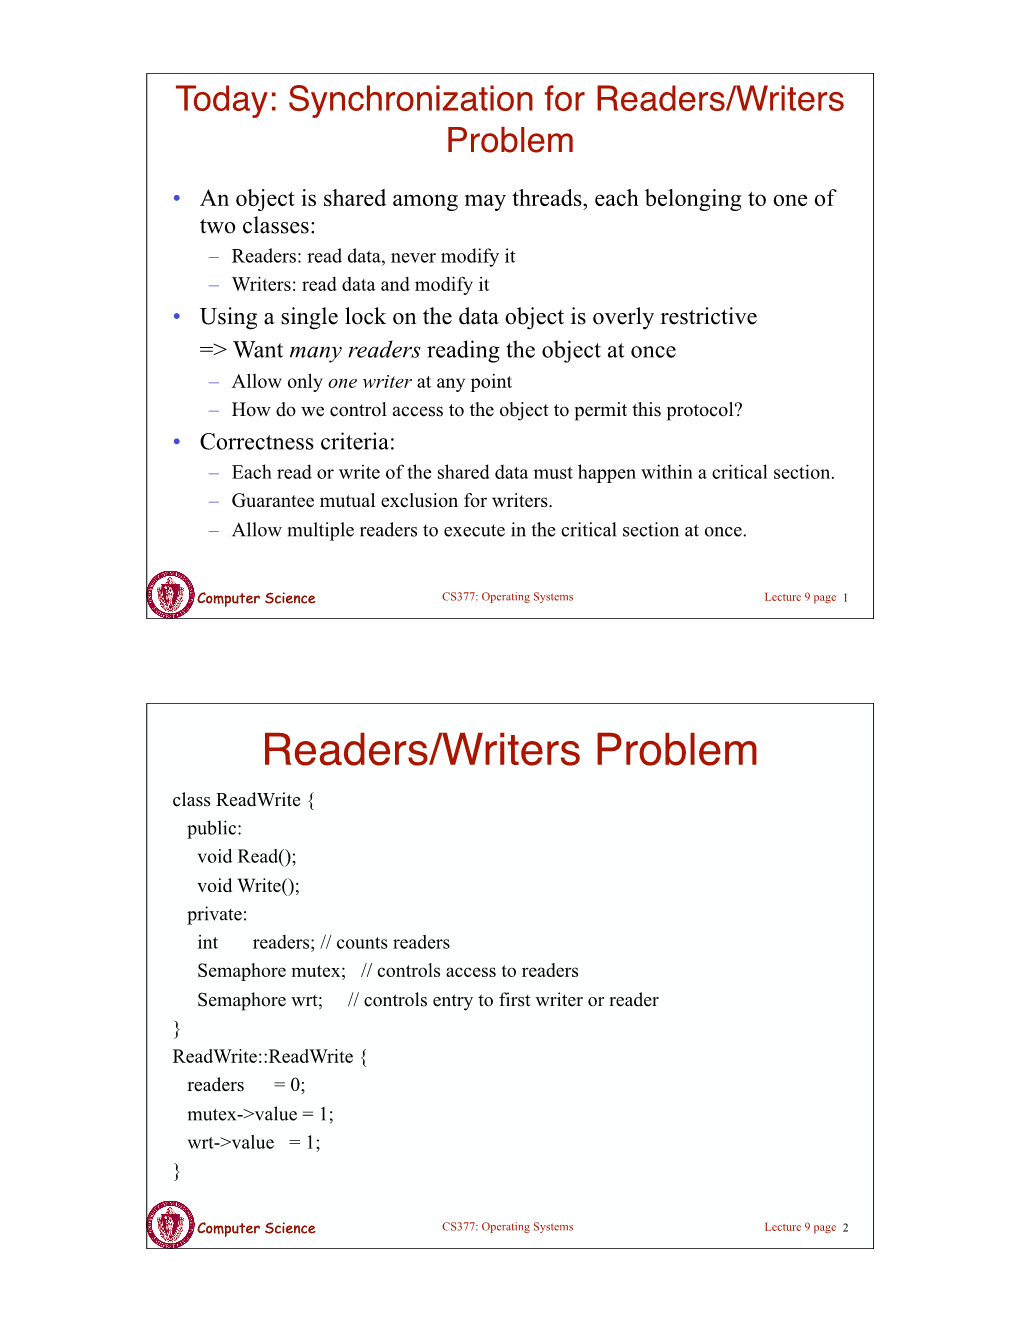 Synchronization for Readers/Writers Problem